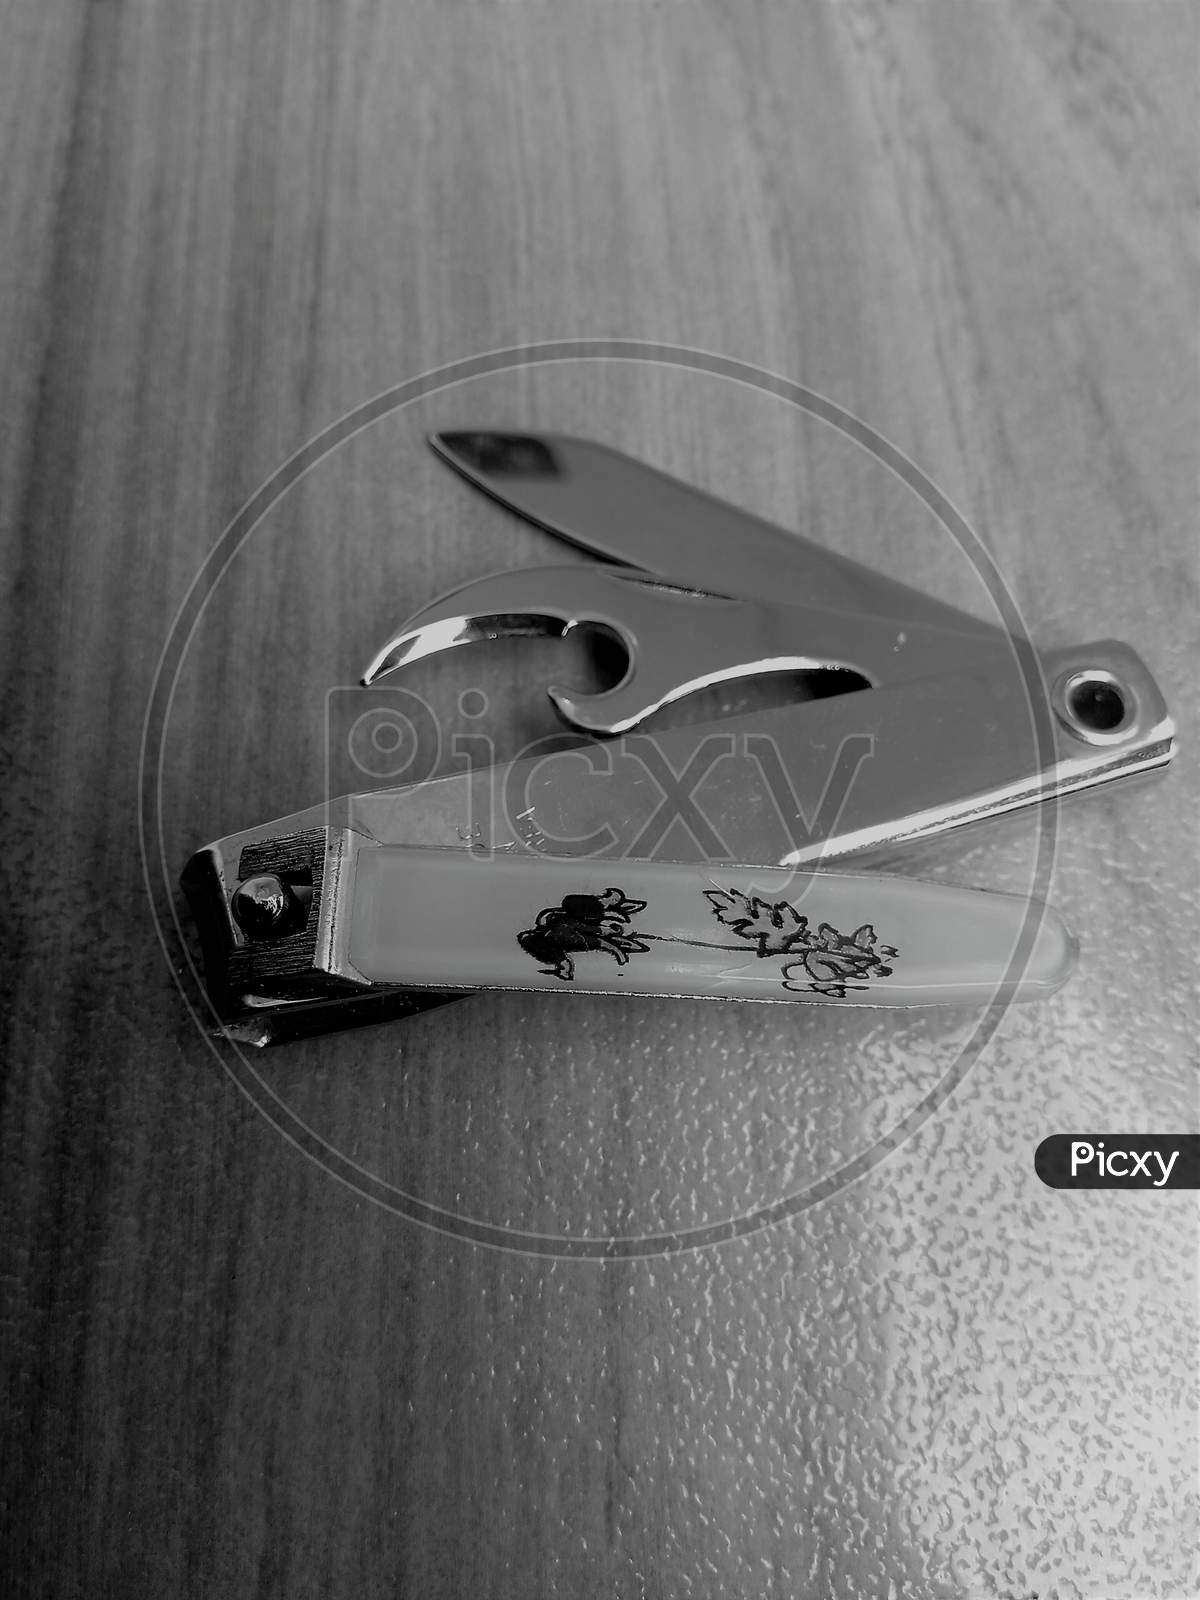 A nail clipper (also called nail clippers, a nail trimmer, a nail cutter or nipper type) is a hand tool used to trim fingernails, toenails and hangnails.